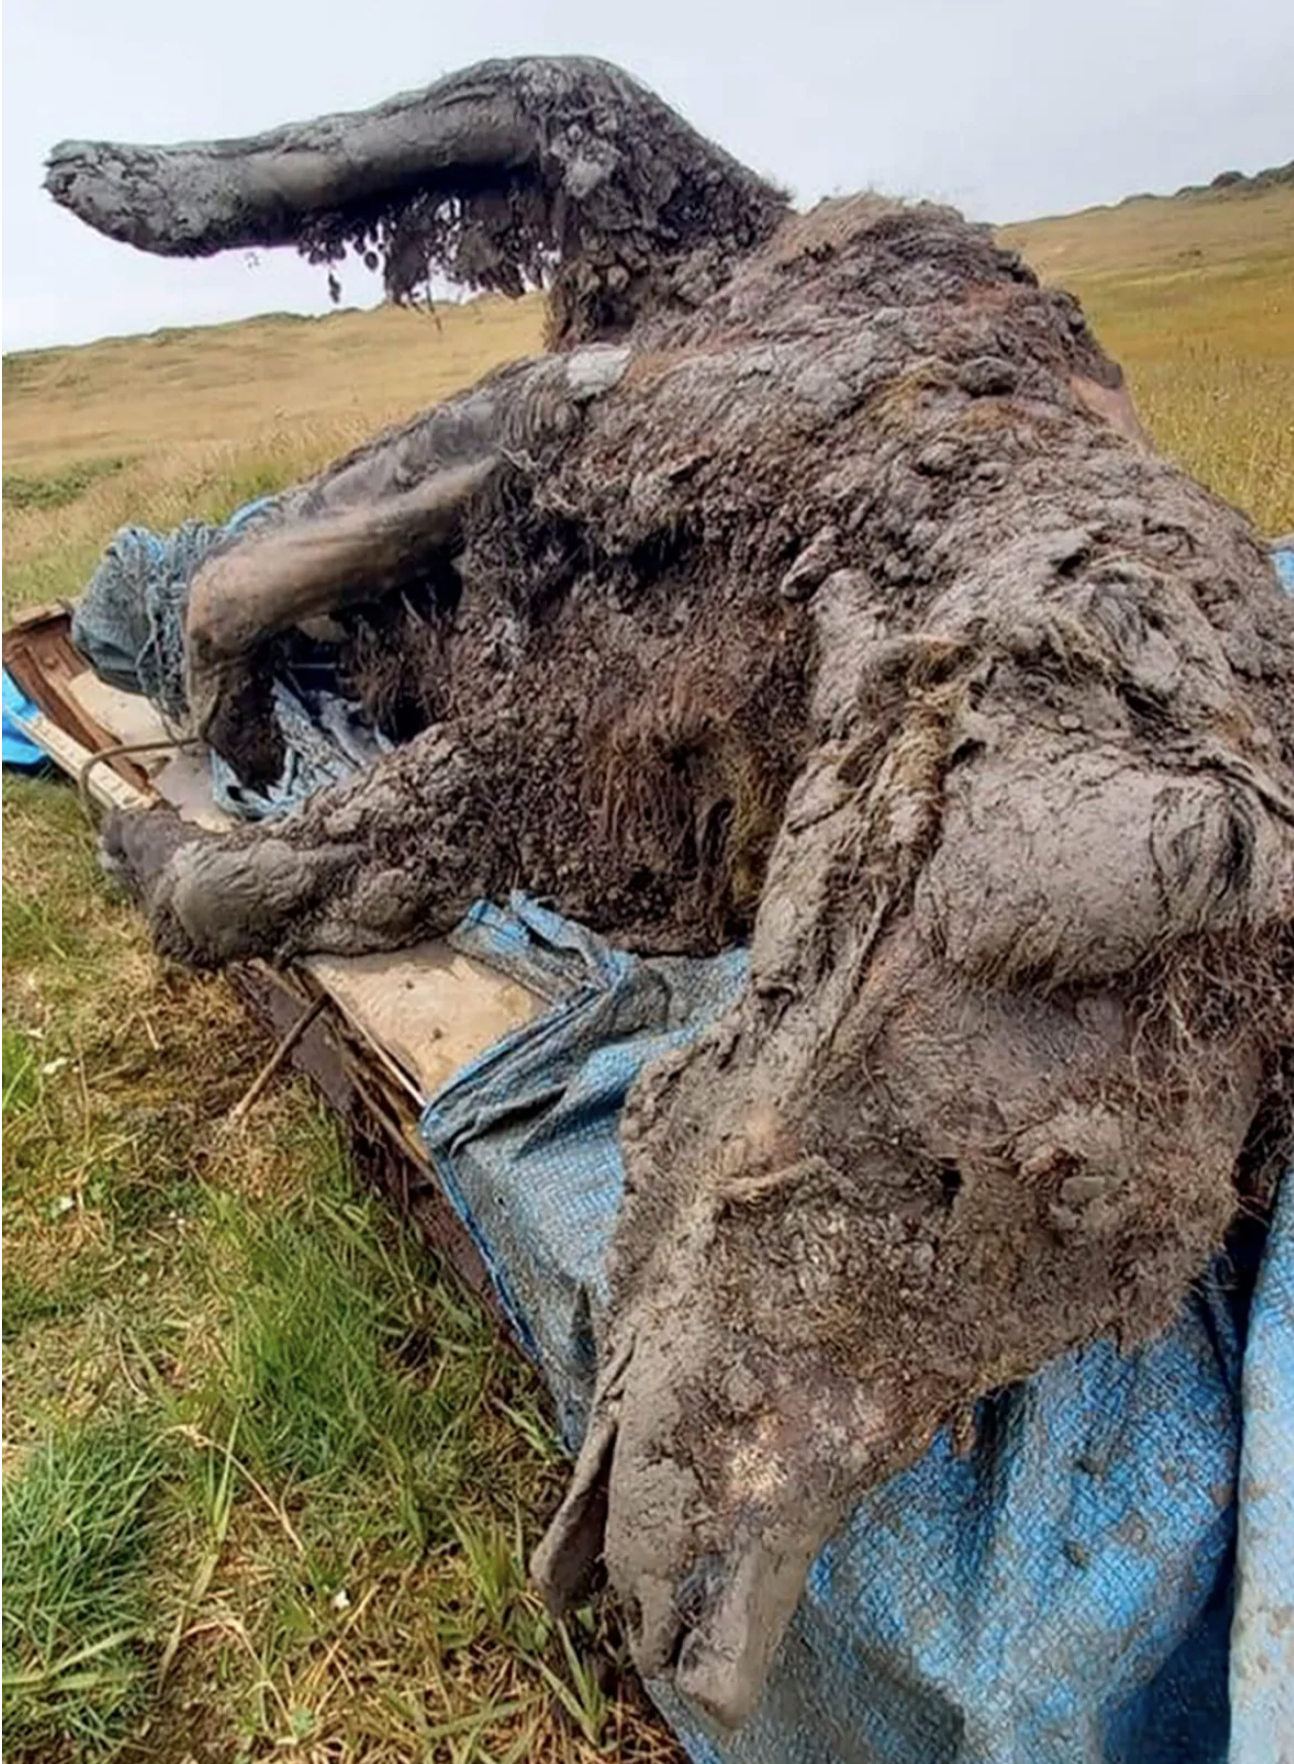 Clumps of fur can still be seen on the immaculately preserved carcass.  (Image: North-Eastern Federal University)